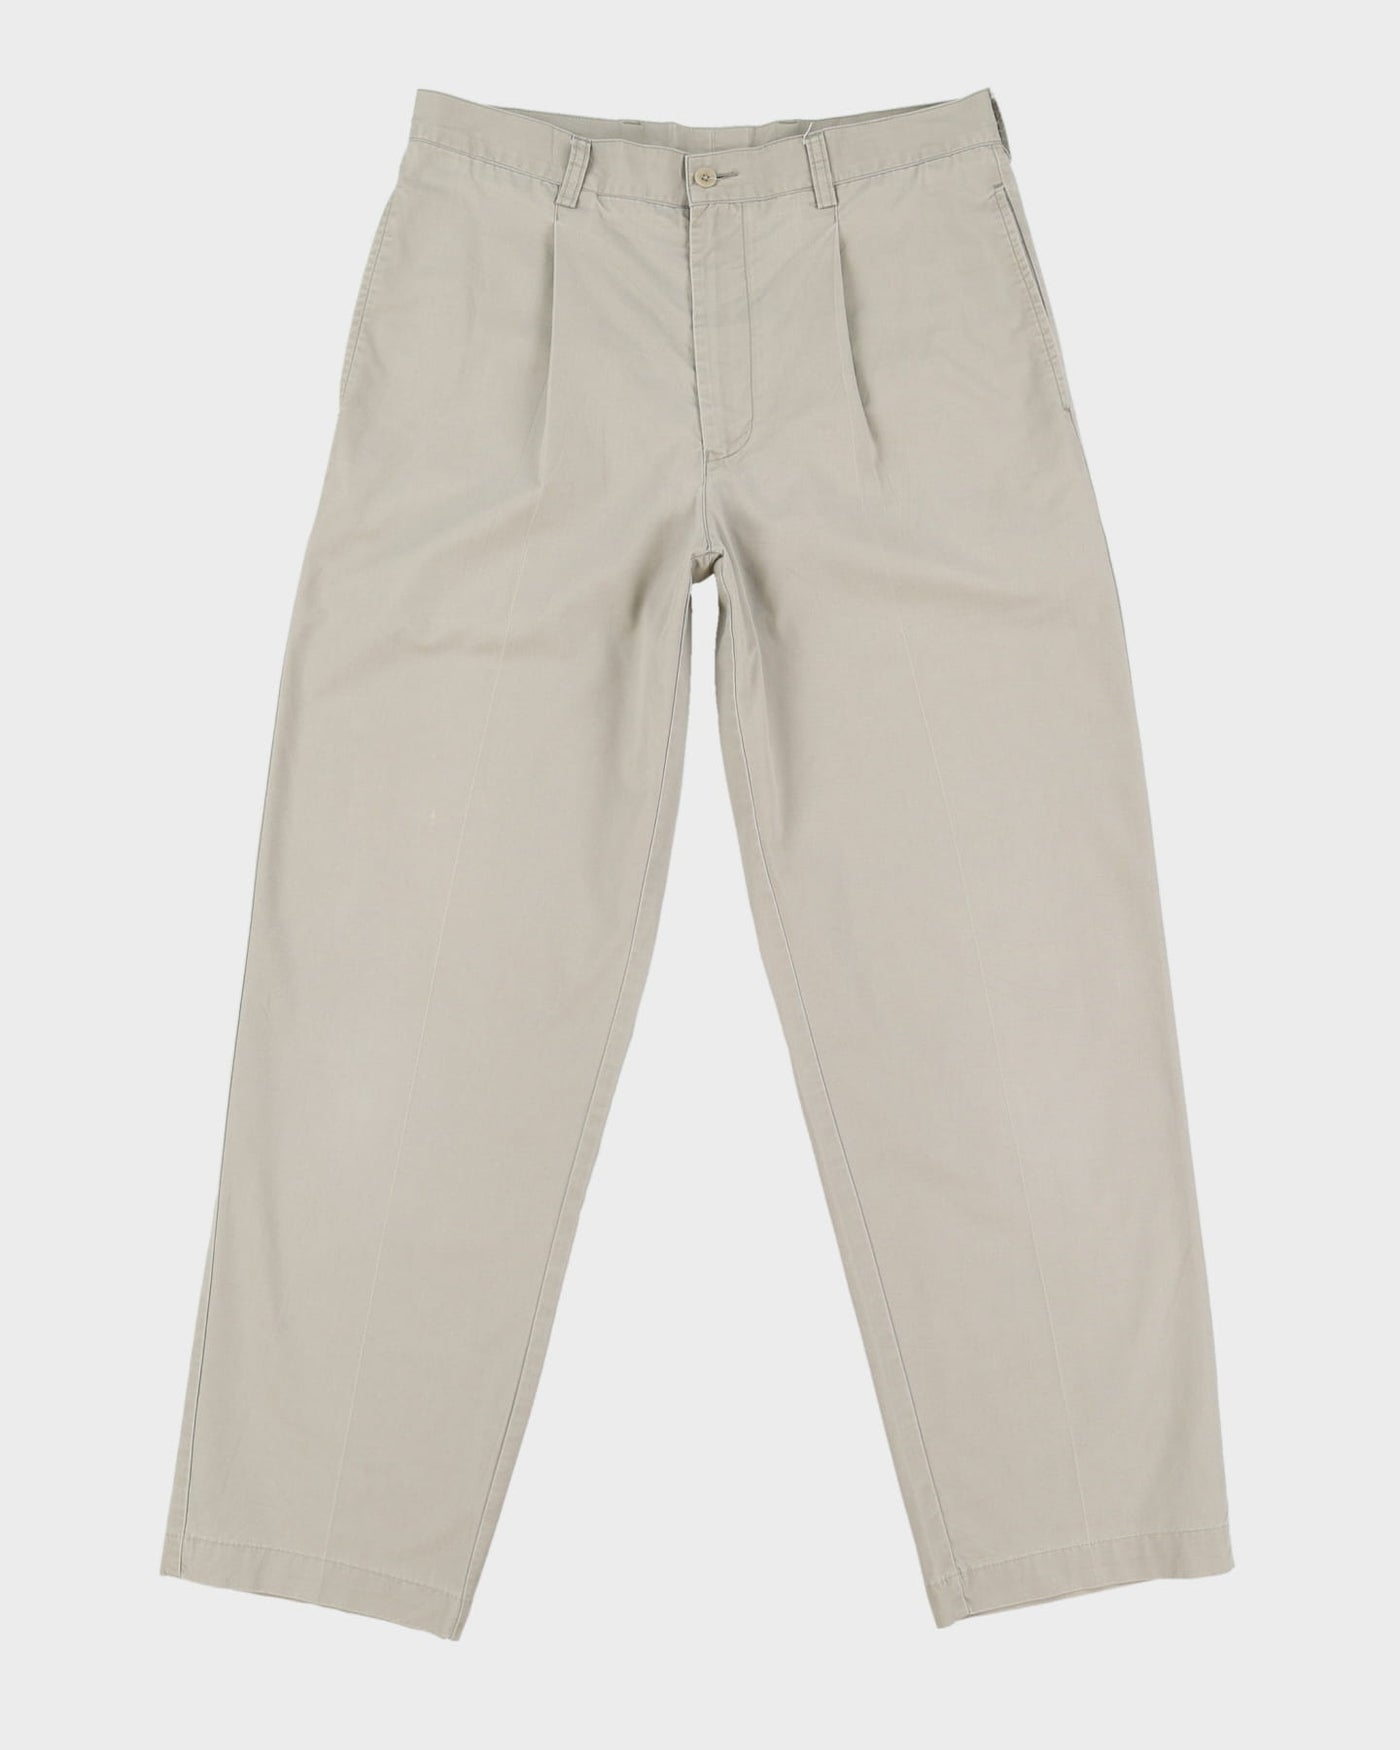 Nautica Grey Casual Pleated Trousers - W32 L32